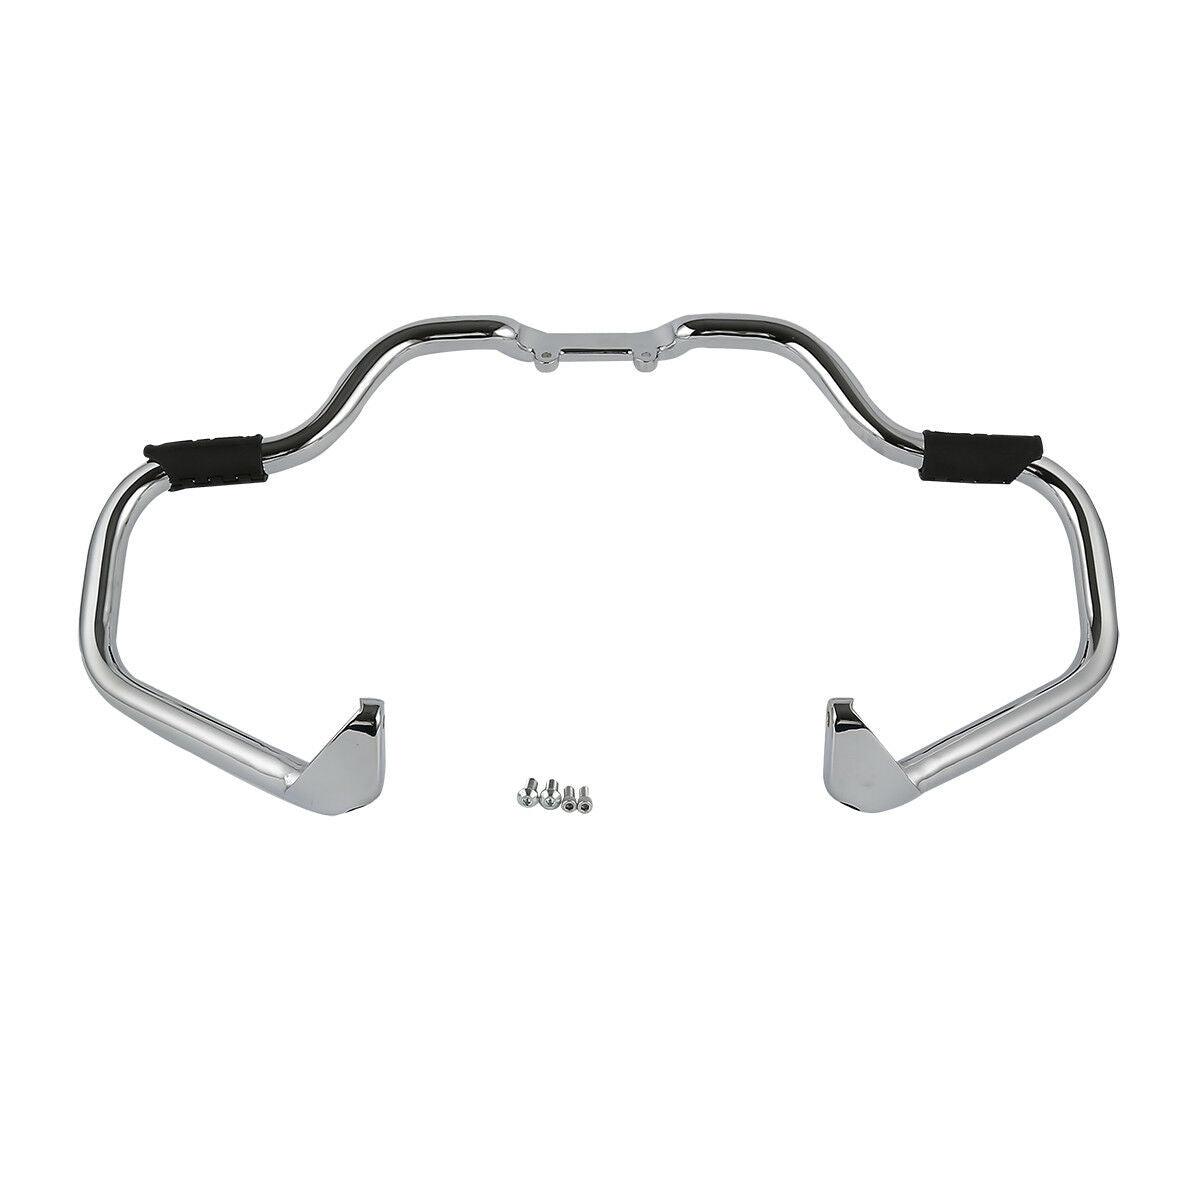 Chrome/Black Mustache Engine Guard Crash Bar For Indian Chieftain 2014-2021 2018 - Moto Life Products